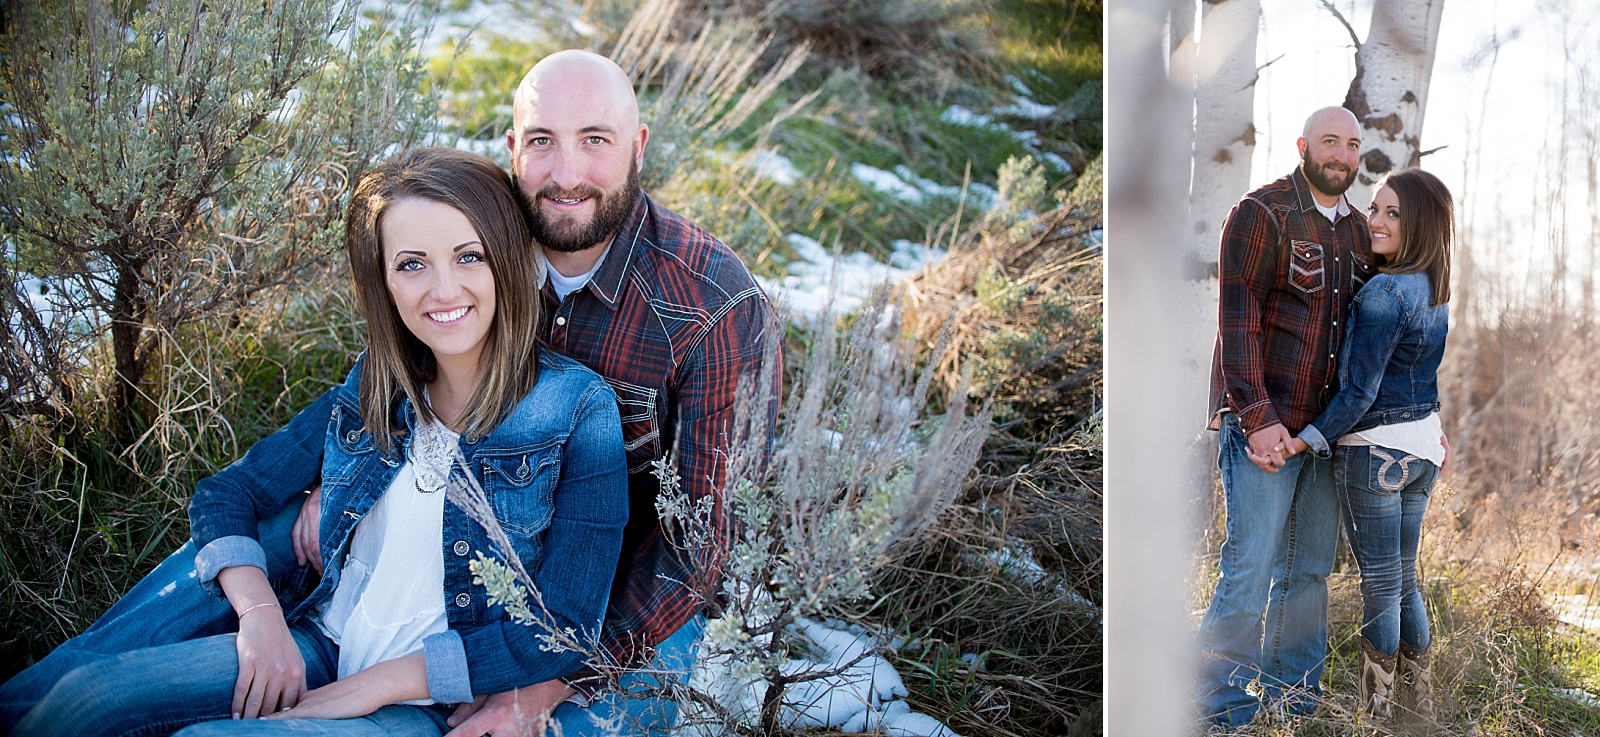 engagement photos in idaho early spring